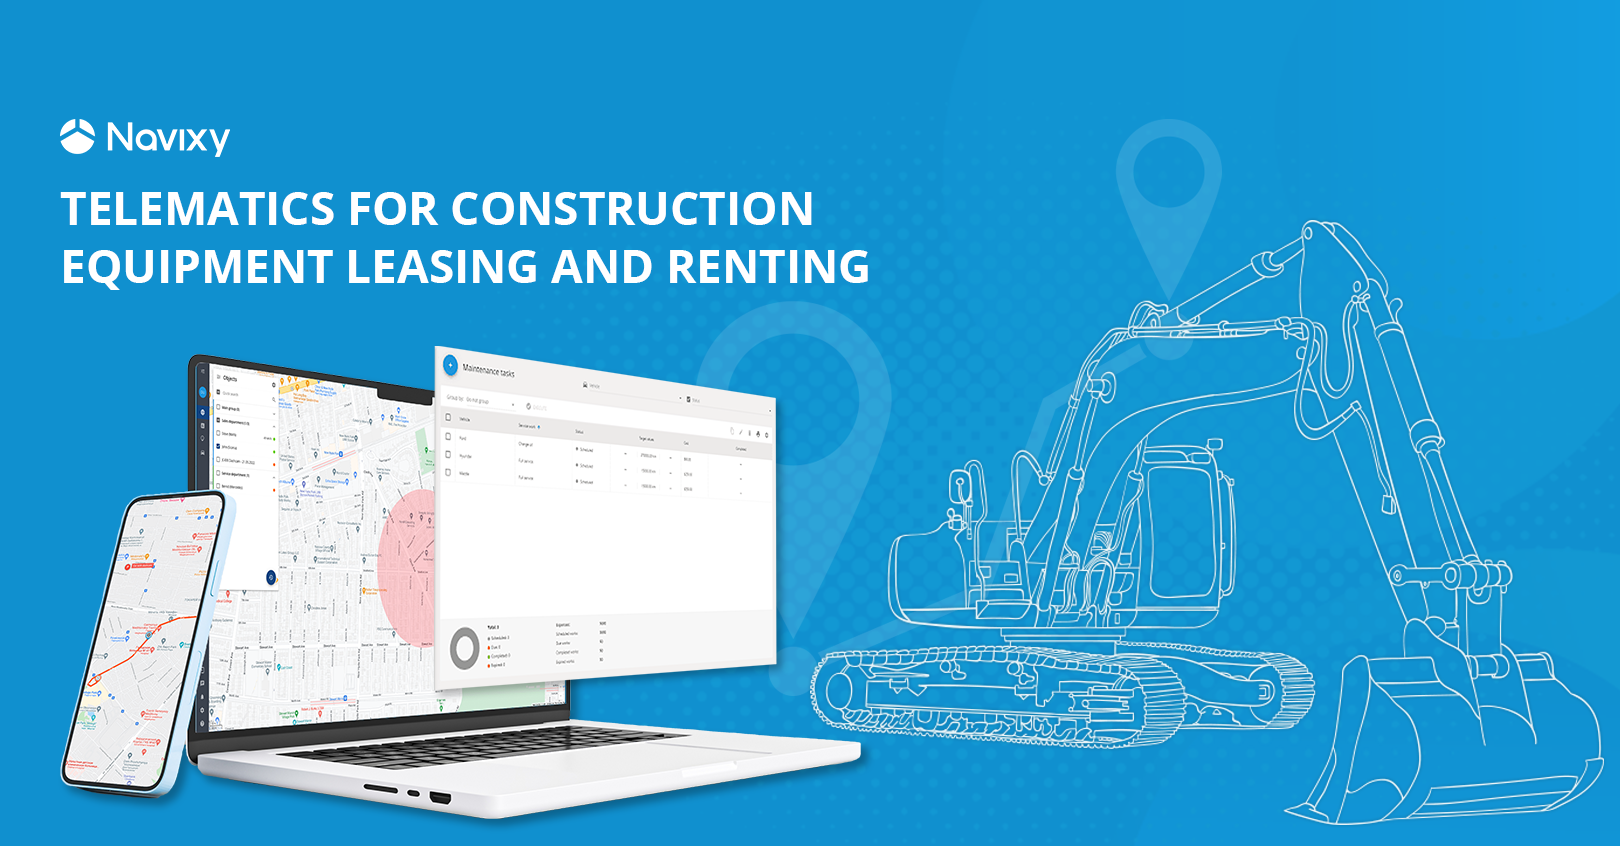 Why construction leasing and renting companies need telematics